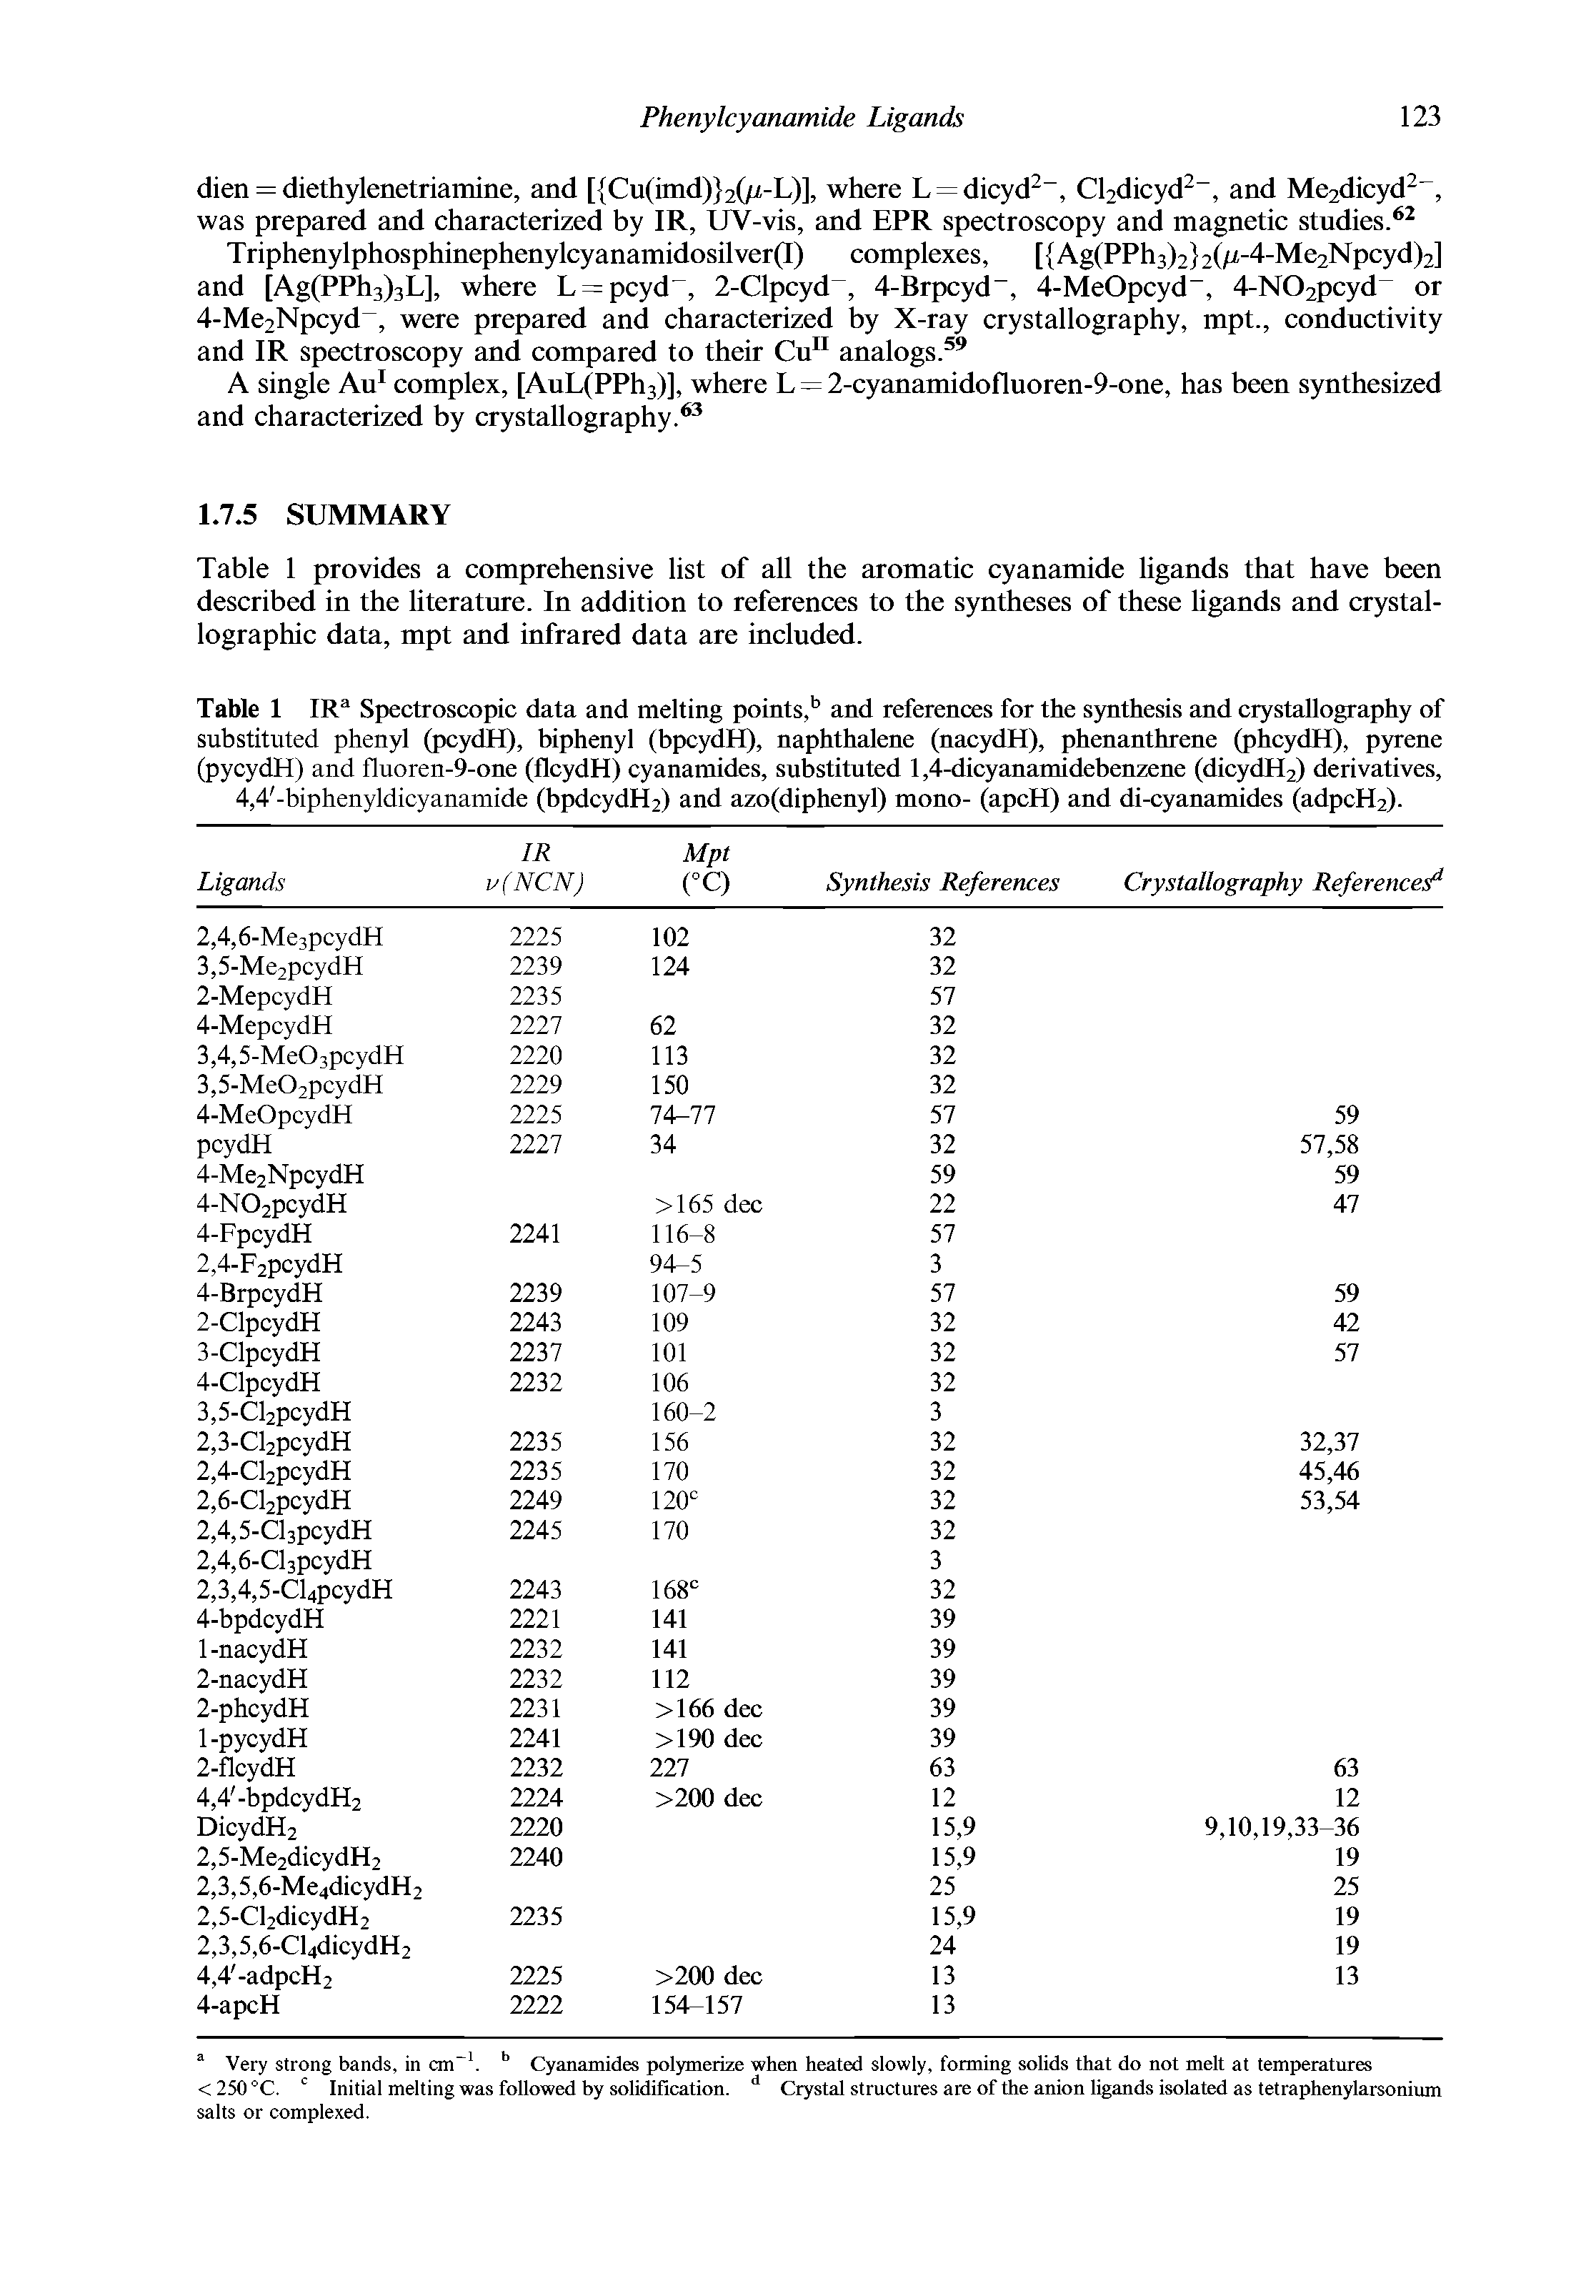 Table 1 IRa Spectroscopic data and melting points,6 and references for the synthesis and crystallography of substituted phenyl (pcydH), biphenyl (bpcydH), naphthalene (nacydH), phenanthrene (phcydH), pyrene (pycydH) and fluoren-9-one (flcydH) cyanamides, substituted 1,4-dicyanamidebenzene (dicydH2) derivatives, 4,4 -biphenyldicyanamide (bpdcydH2) and azo(diphenyl) mono- (apcH) and di-cyanamides (adpcH2).